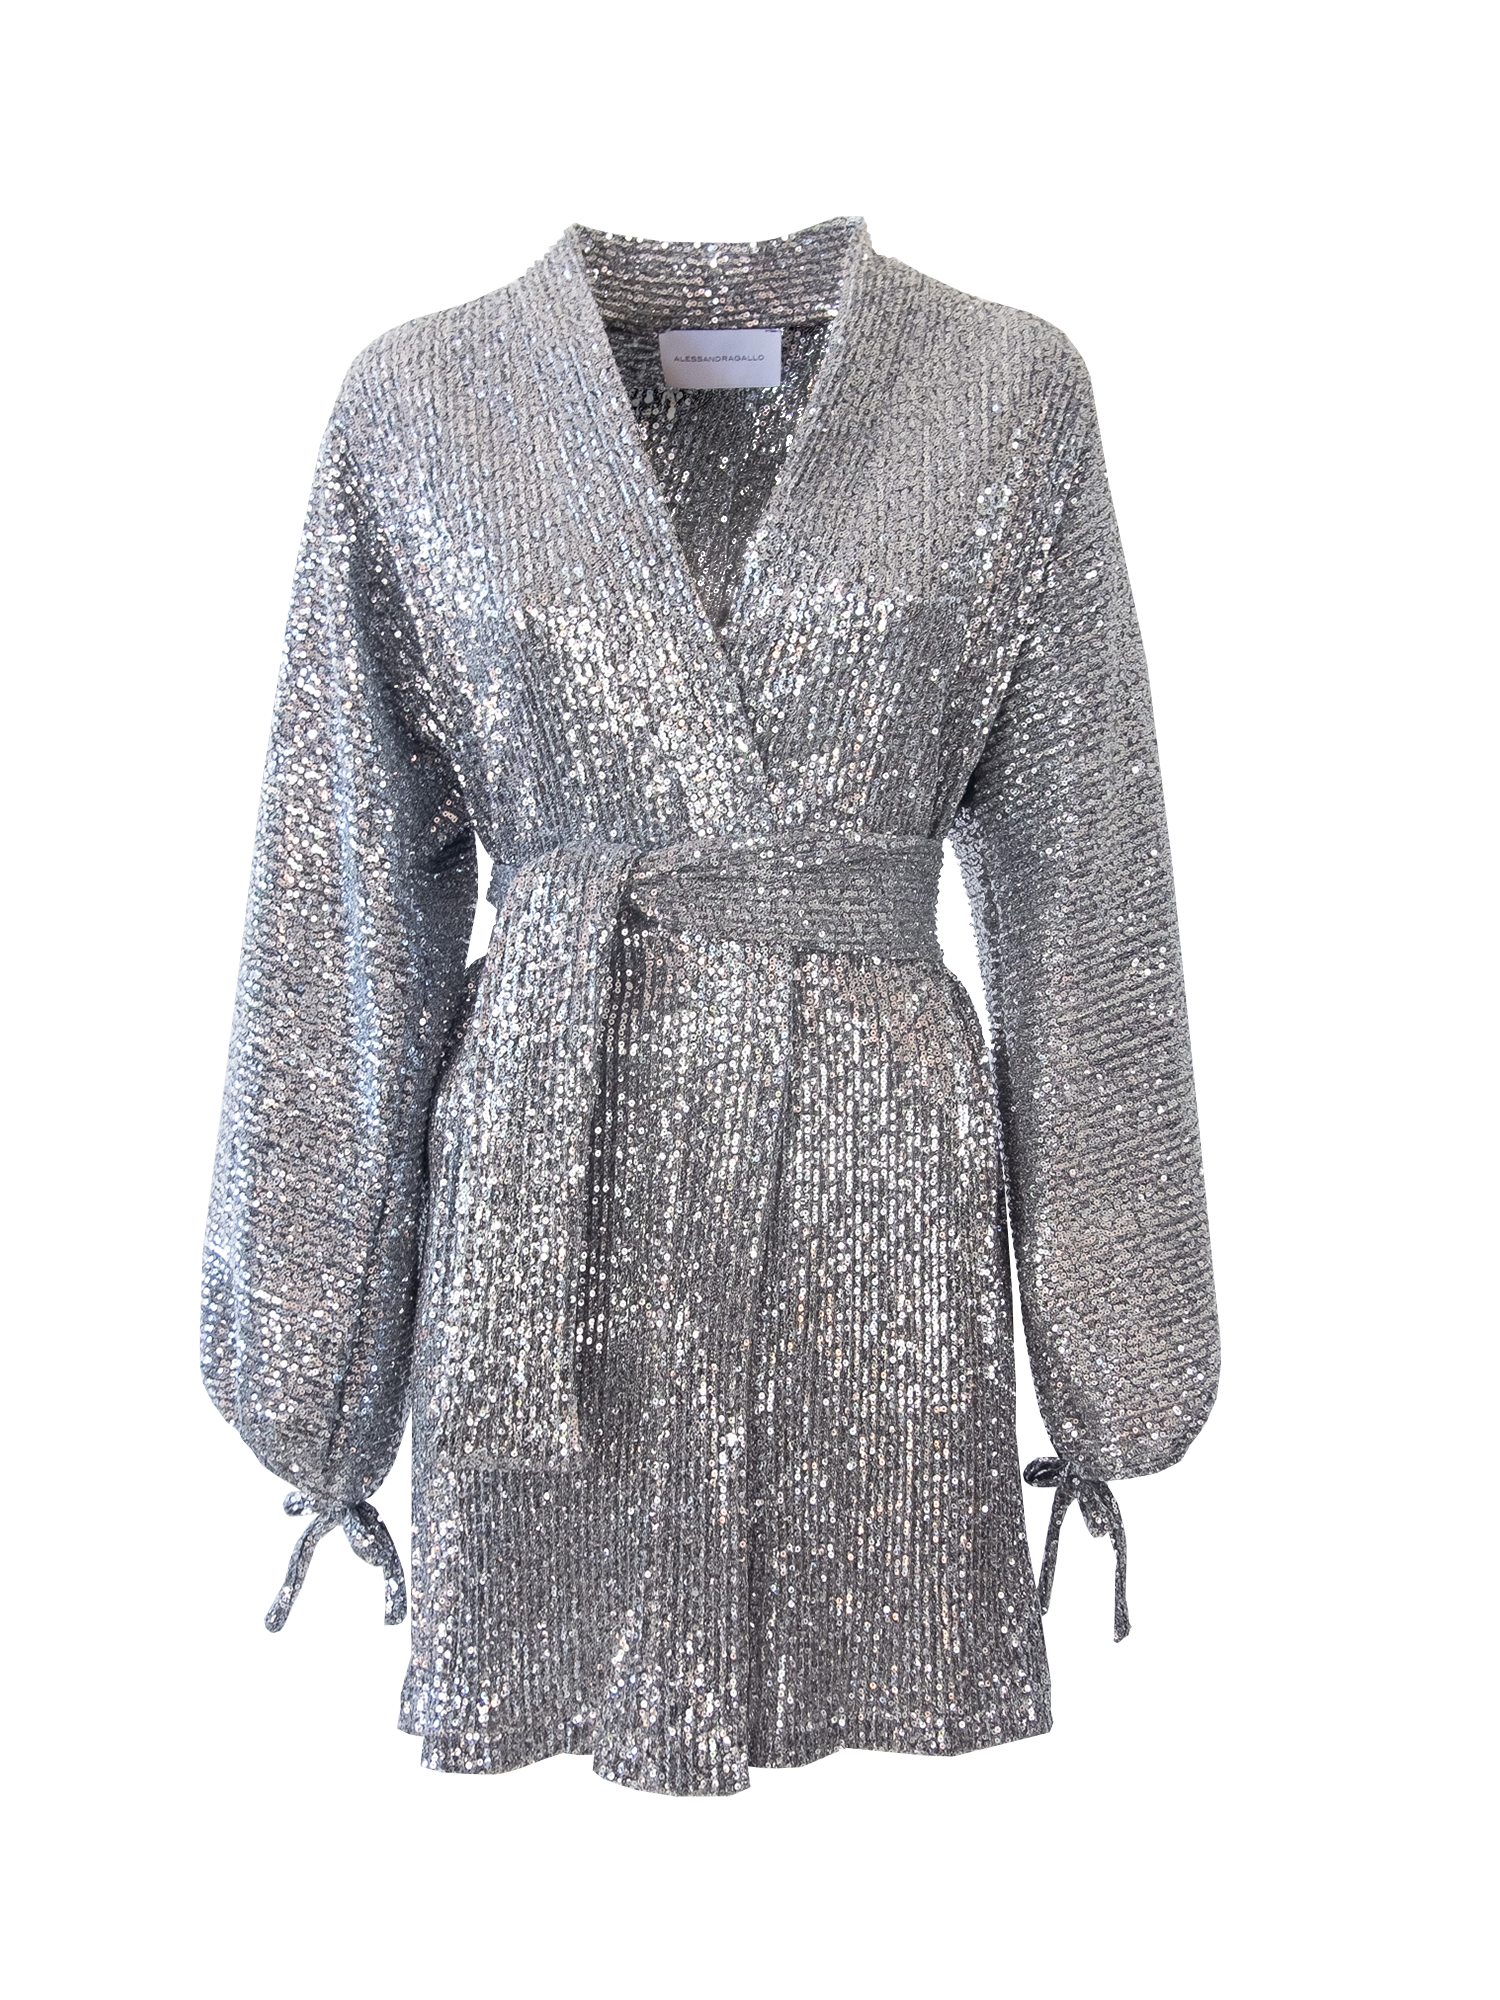 ELVIRA - short dress with wide sleeve and sash in silver sequin lo